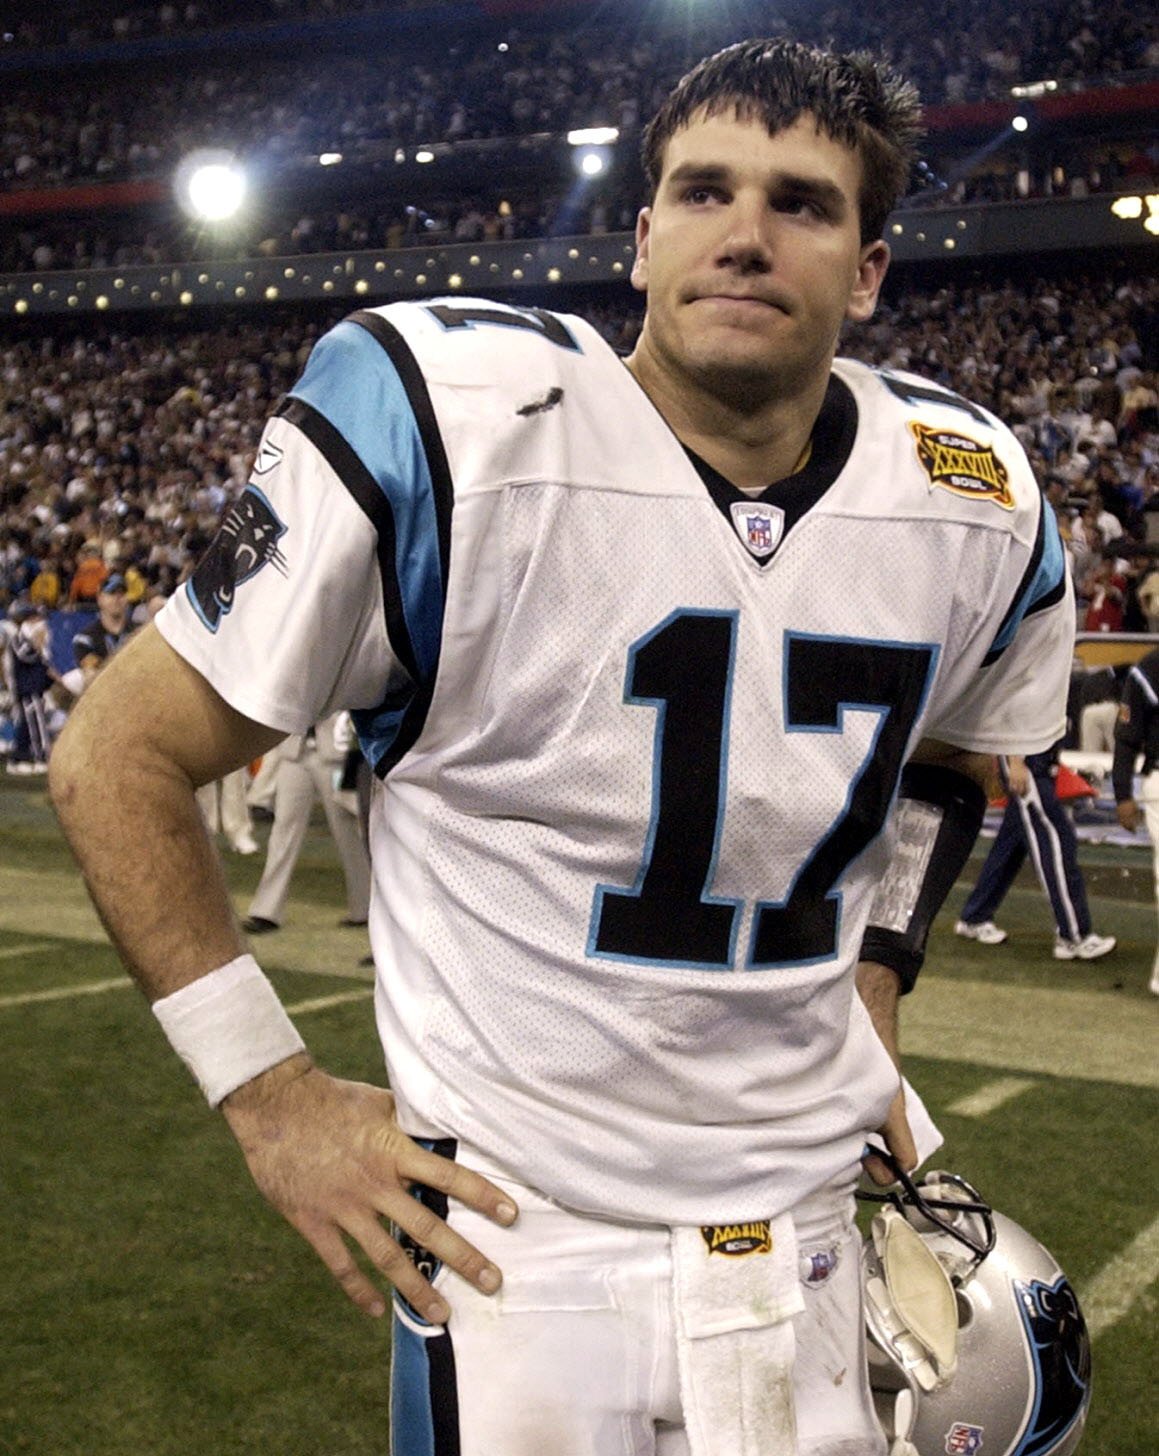 Happy 43rd birthday to former Panthers QB Jake Delhomme! 